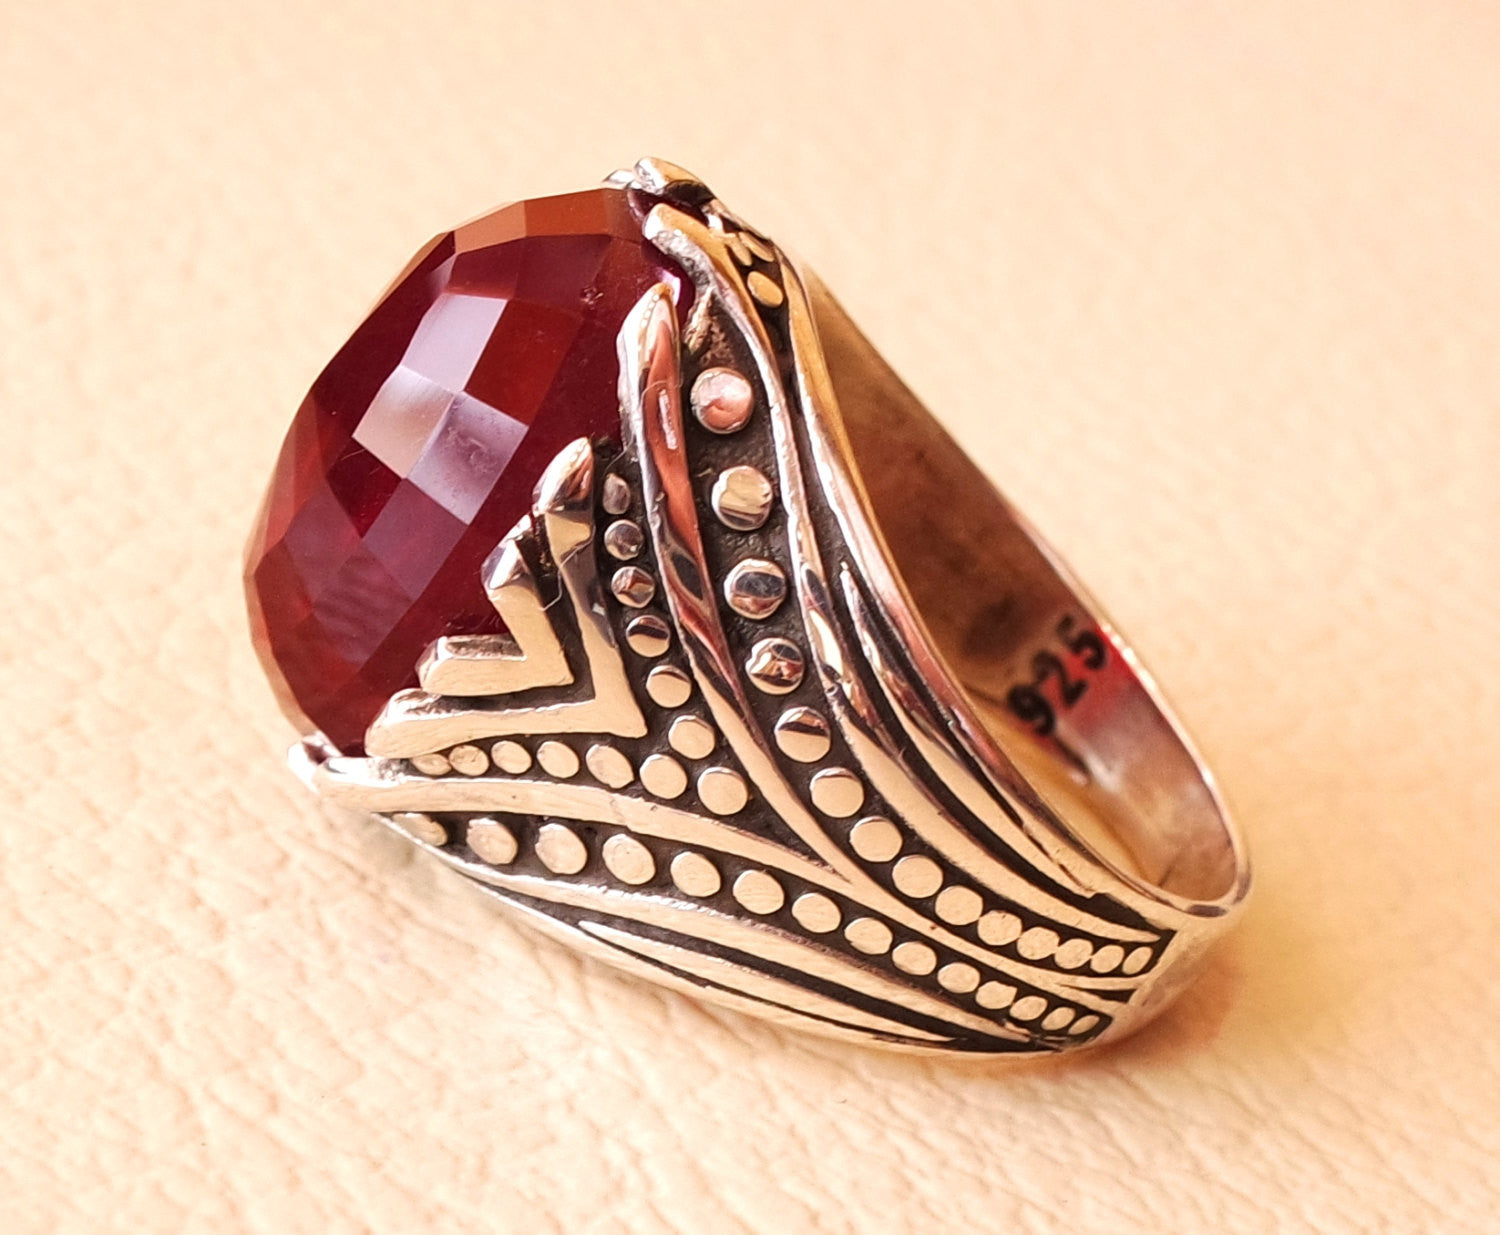 russet burgundy color reddish faceted oval stone man ring sterling silver 925 any size fast shipping antique eastern ottoman style jewelry